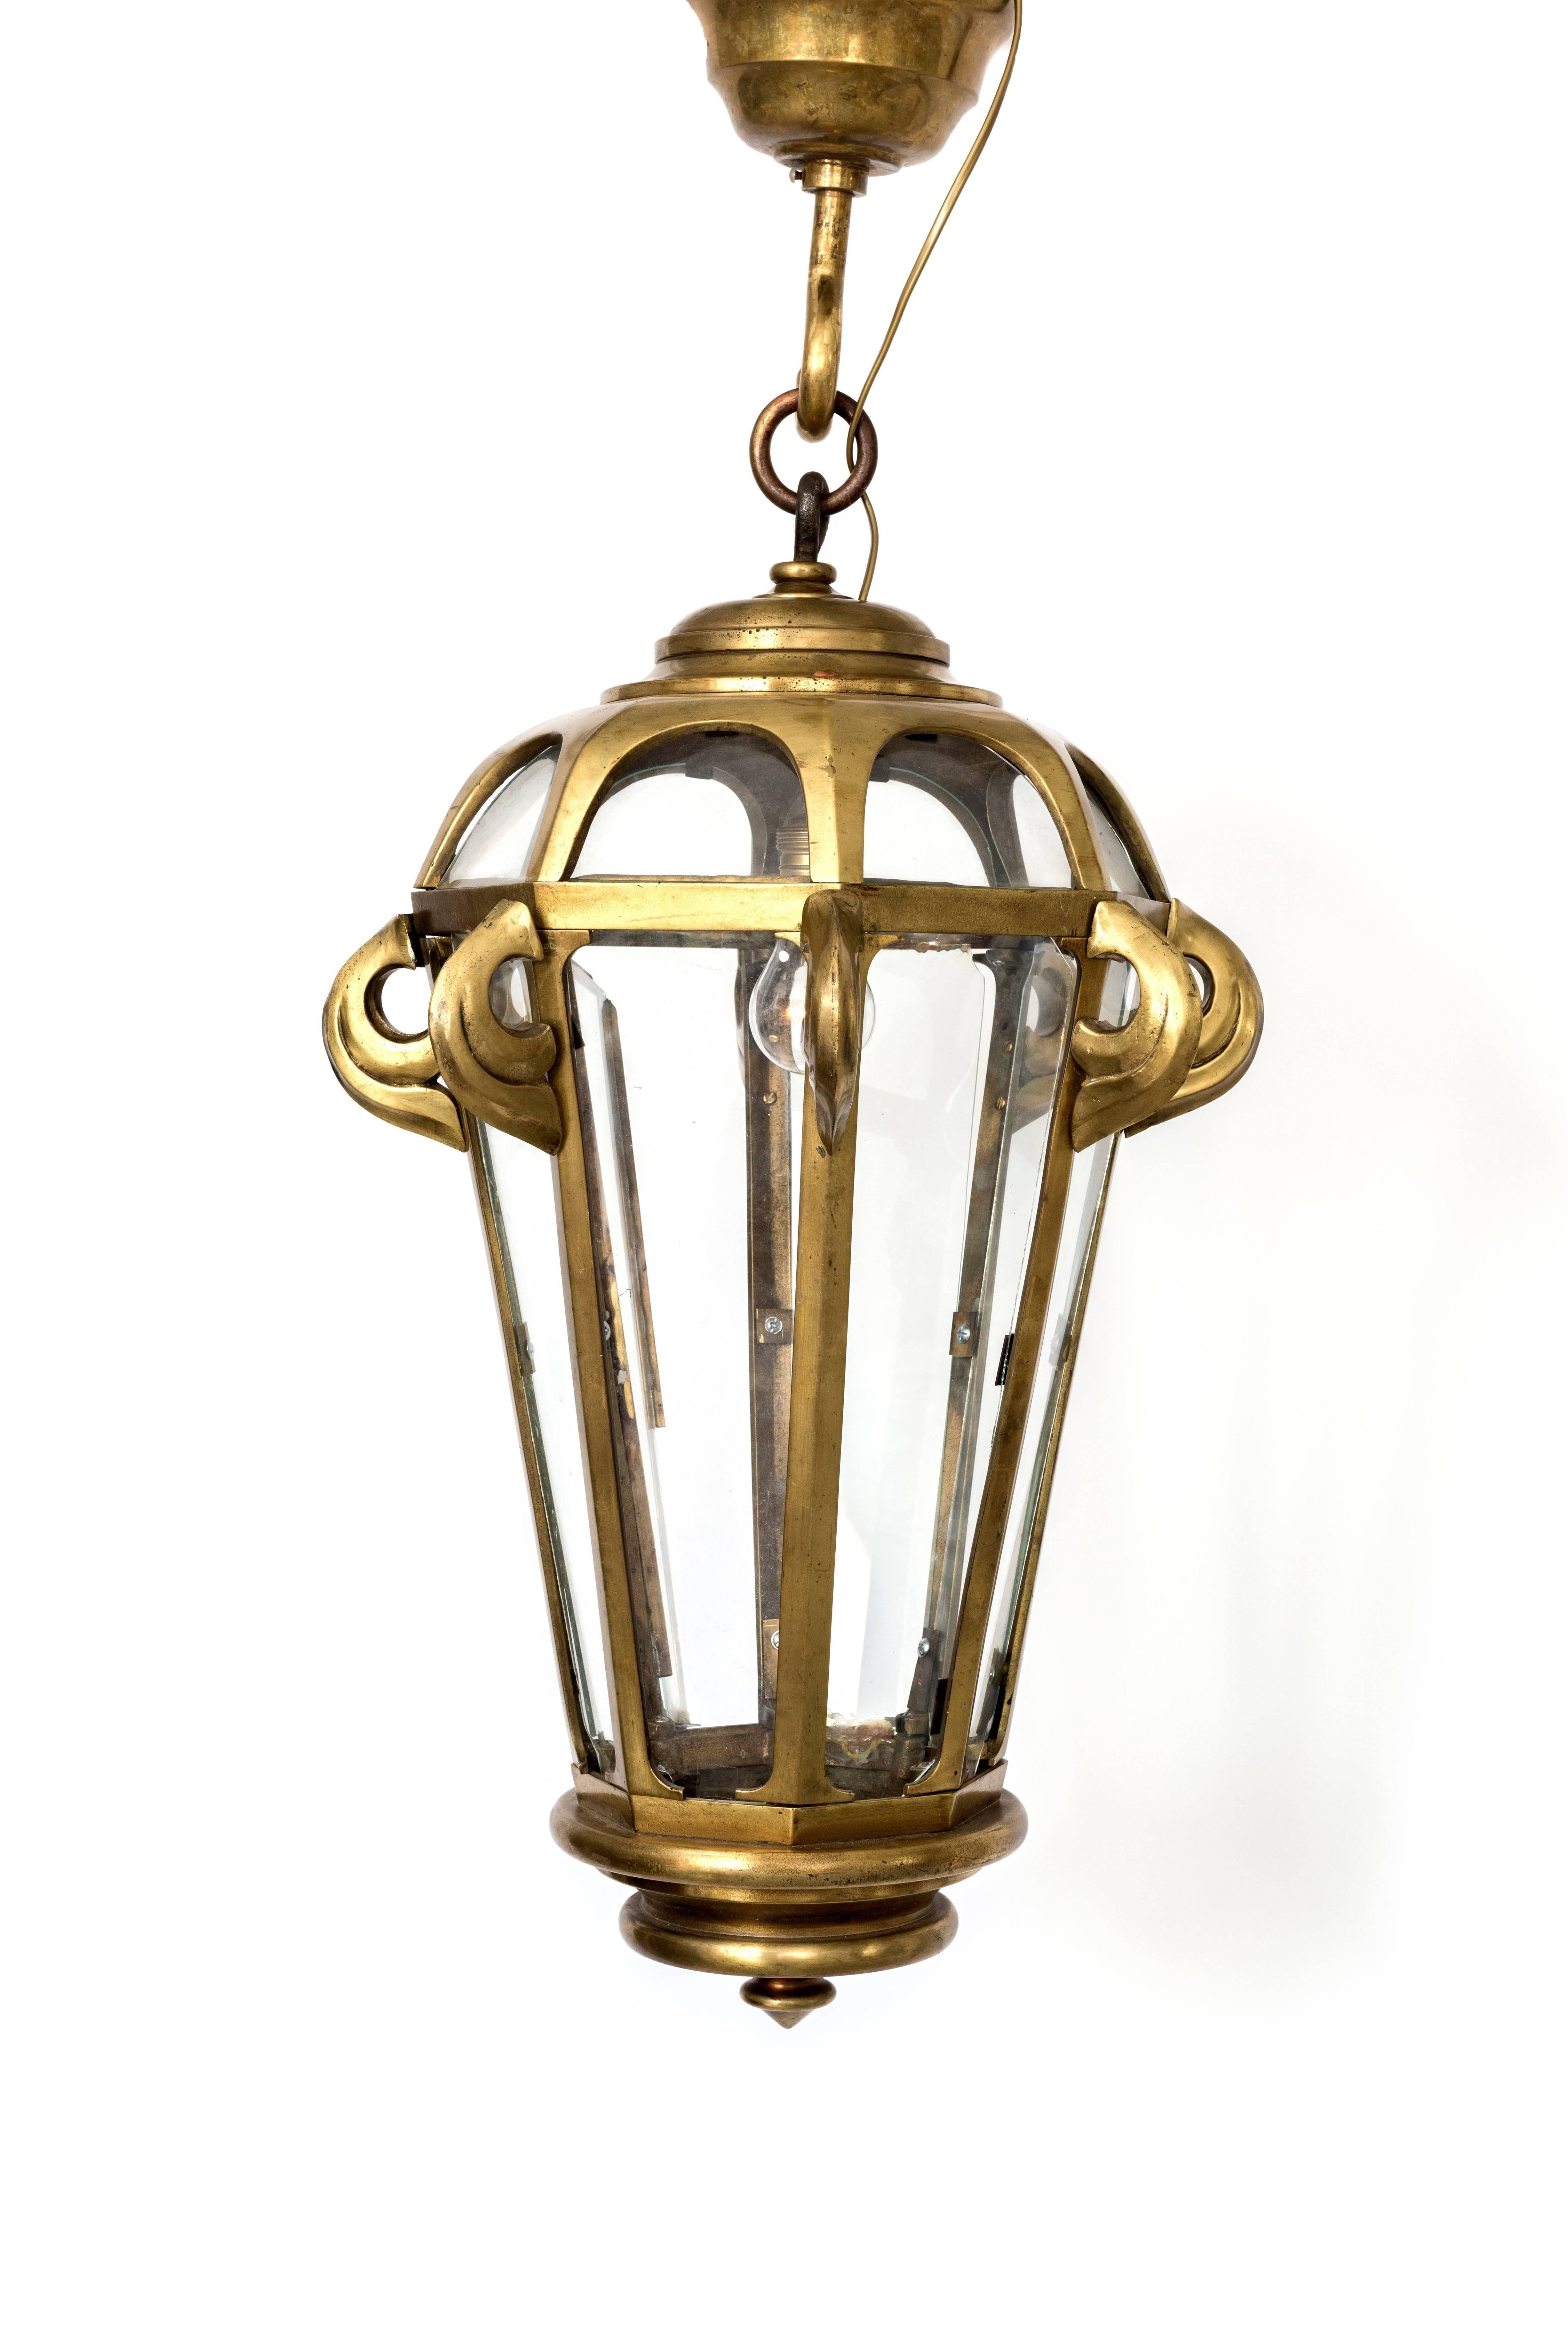 A six sided large French Bronze Lantern. French.